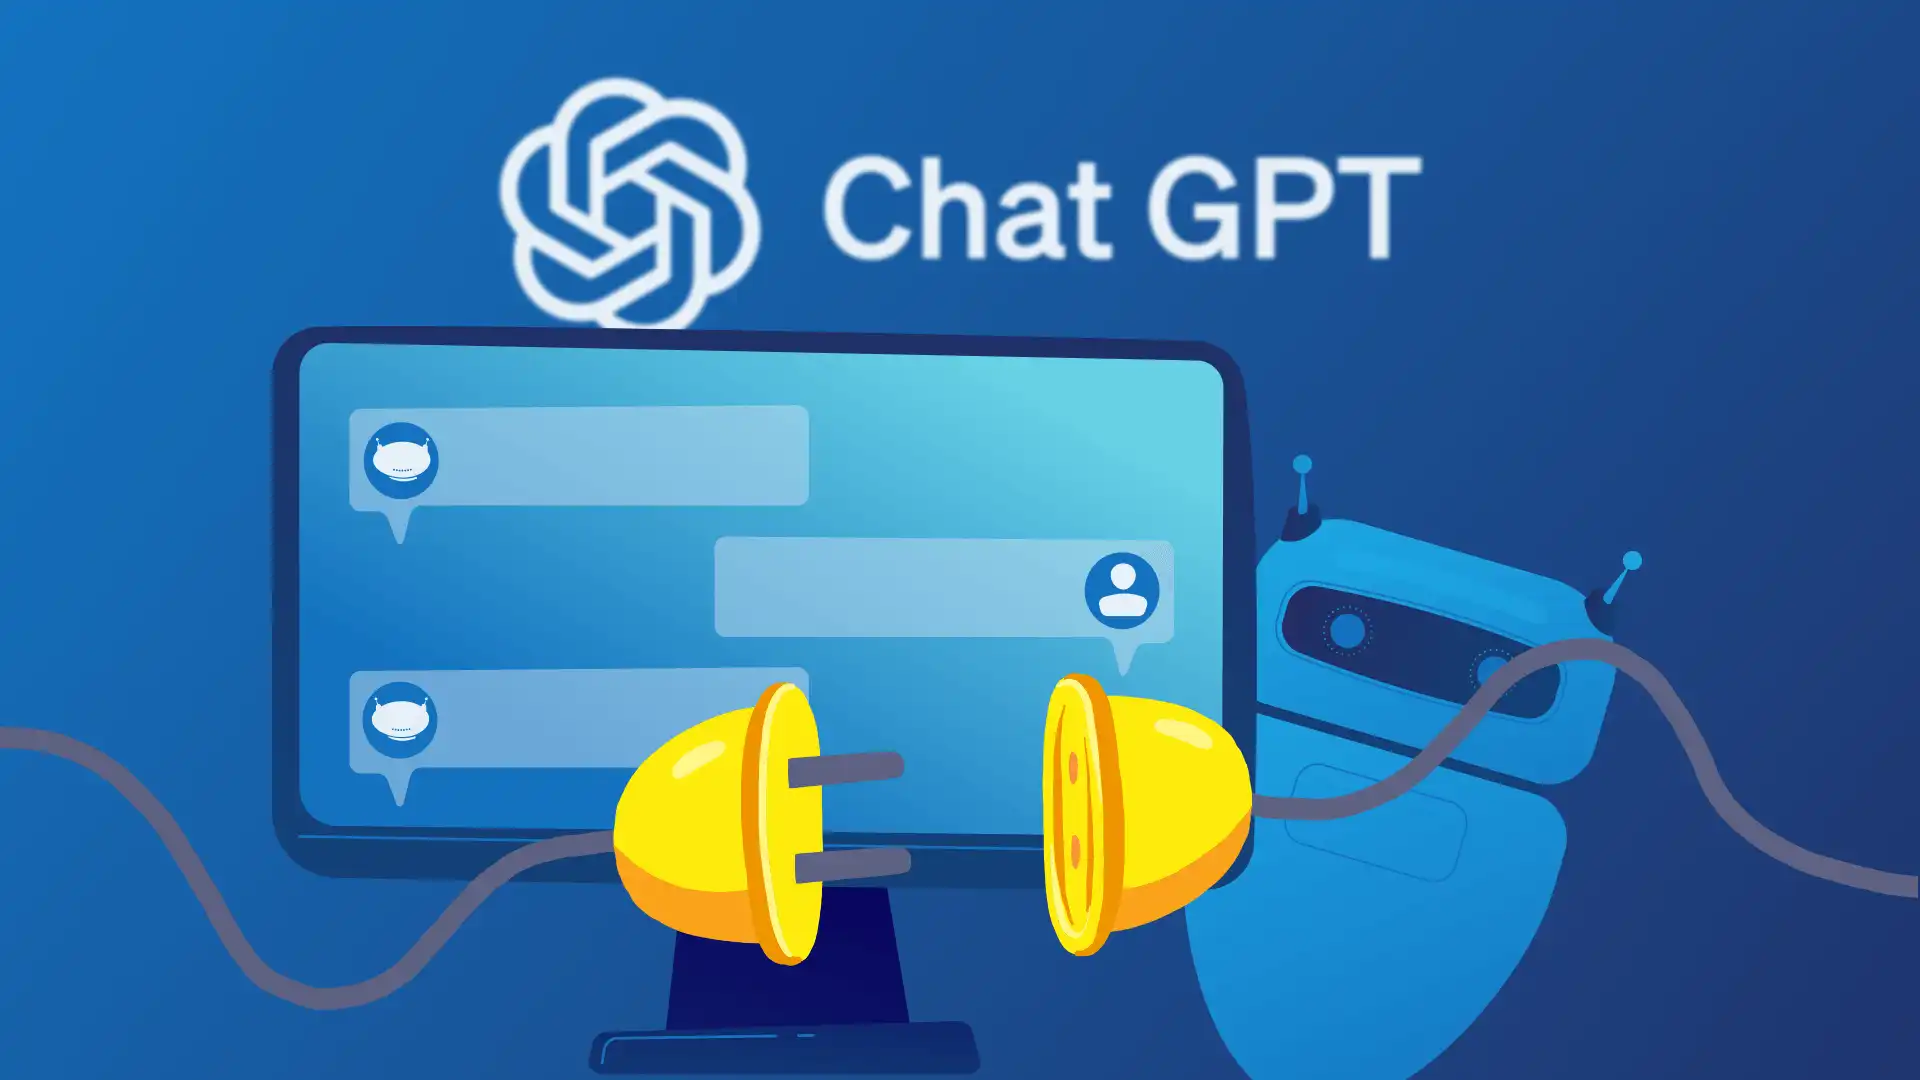 16+ ChatGPT Plugins for Enhanced Marketing: How to Use Them